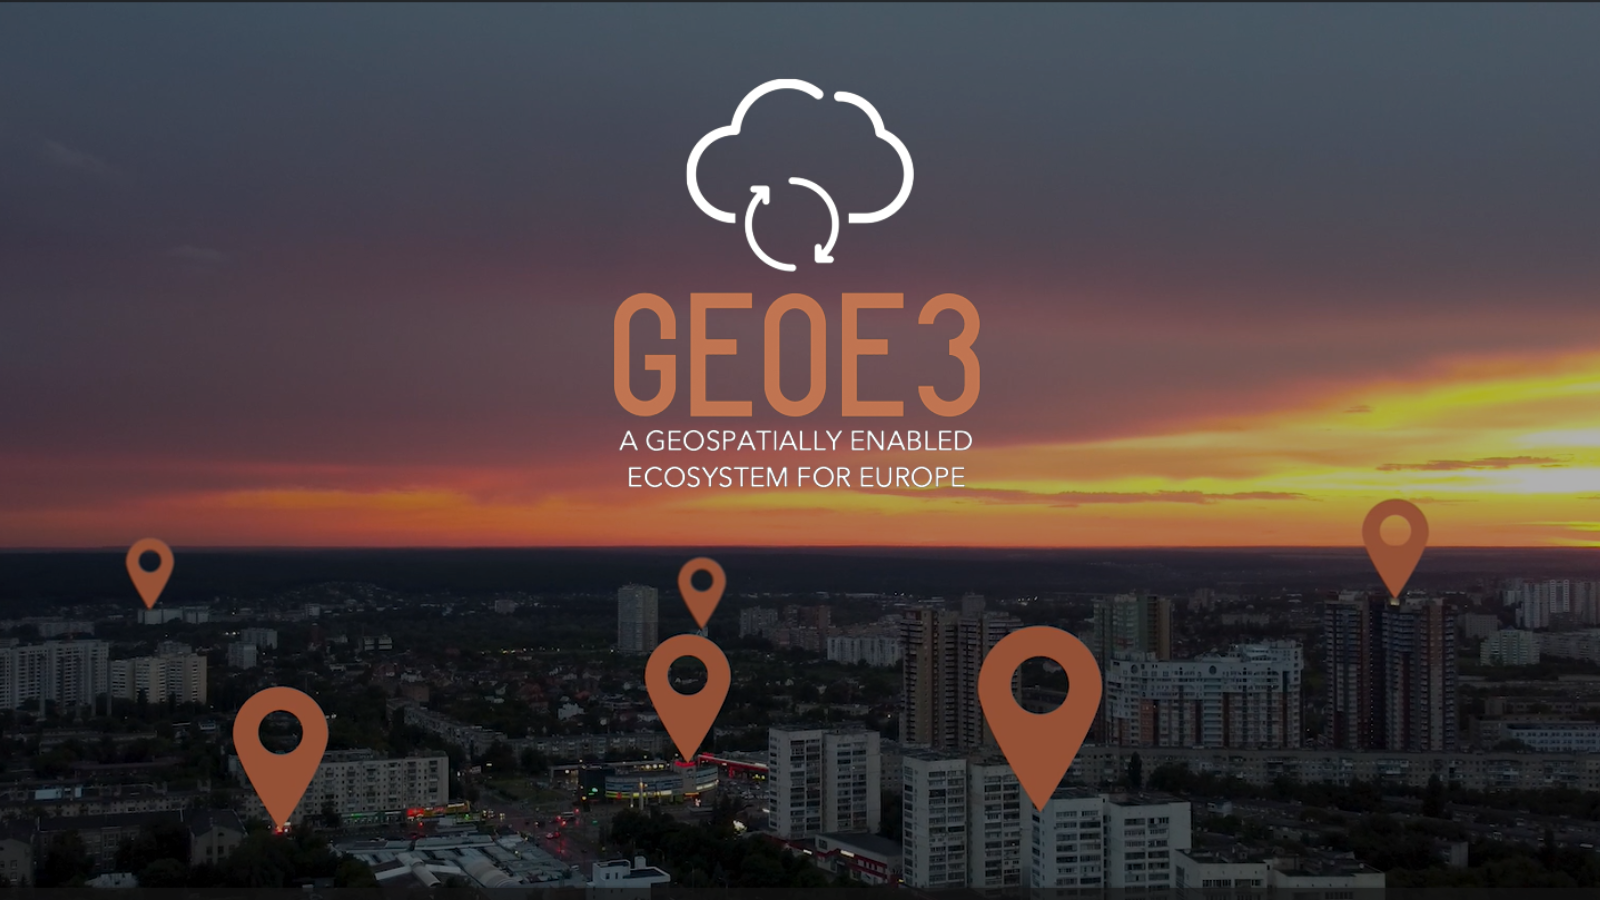 GeoE3 paved the road for better access and utilisation of location data in Europe 